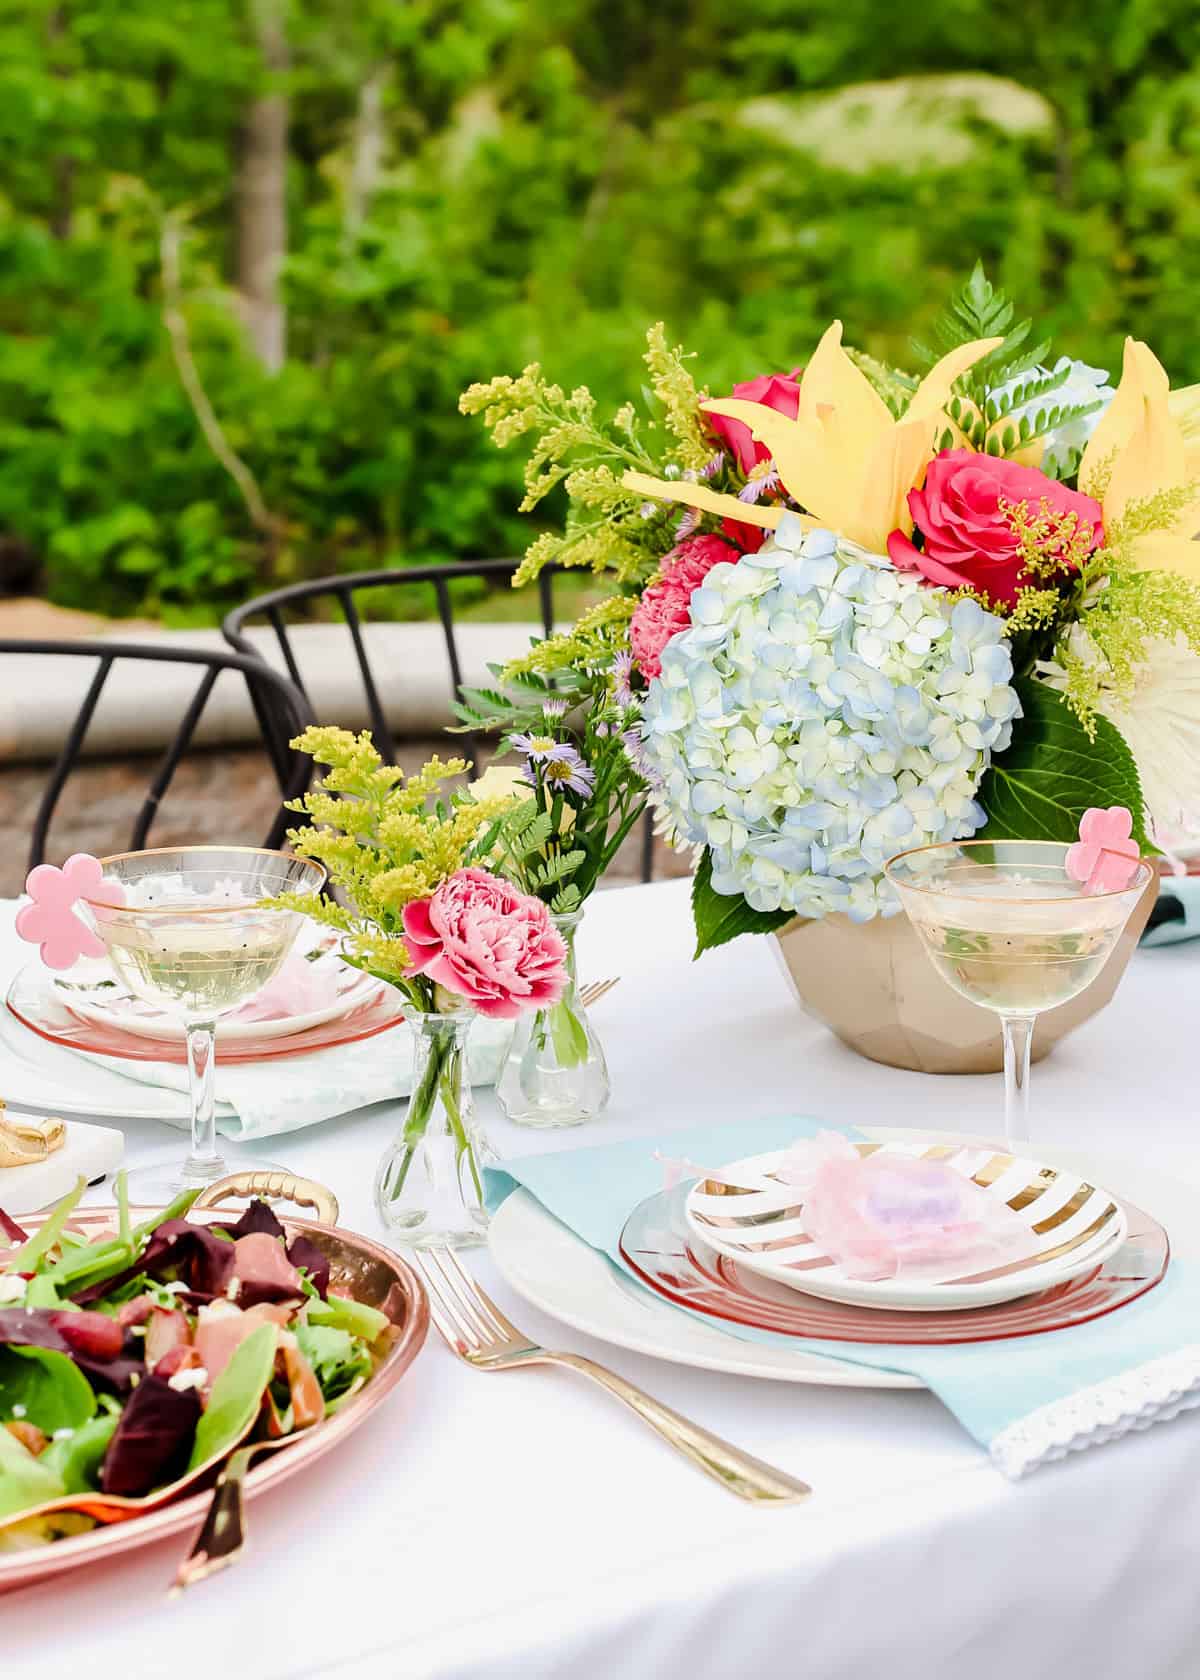 luncheon table setting outdoors with flowers centerpiece and layered plates with coupe glasses.